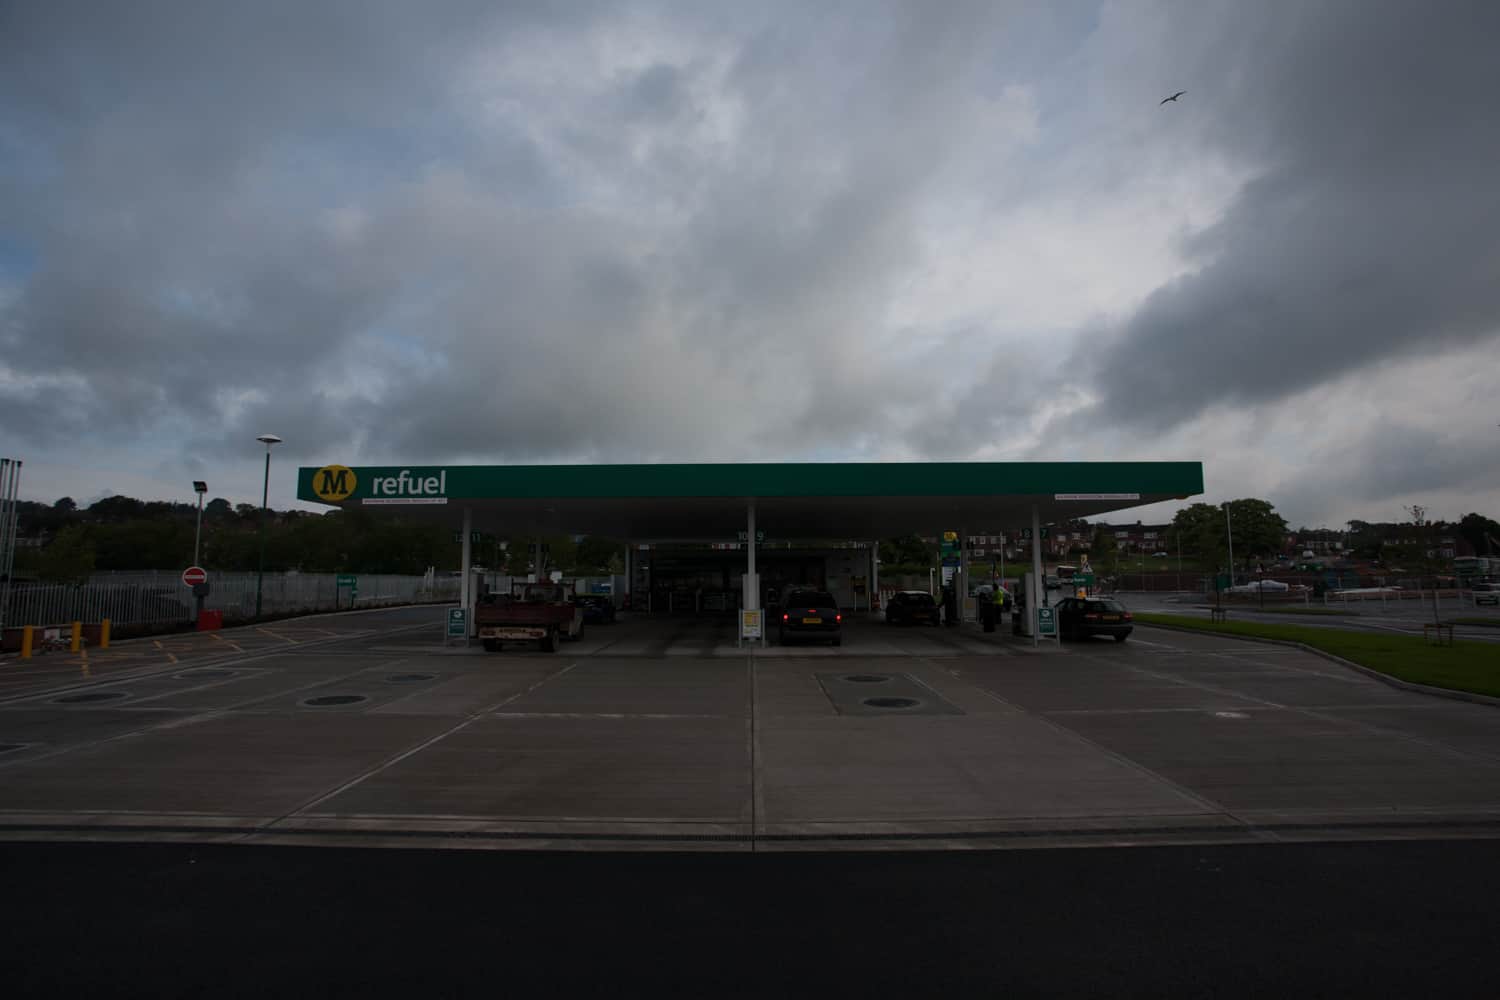  Petrol station, Morrisons, Exeter, by Industrial Photographer Rick McEvoy 